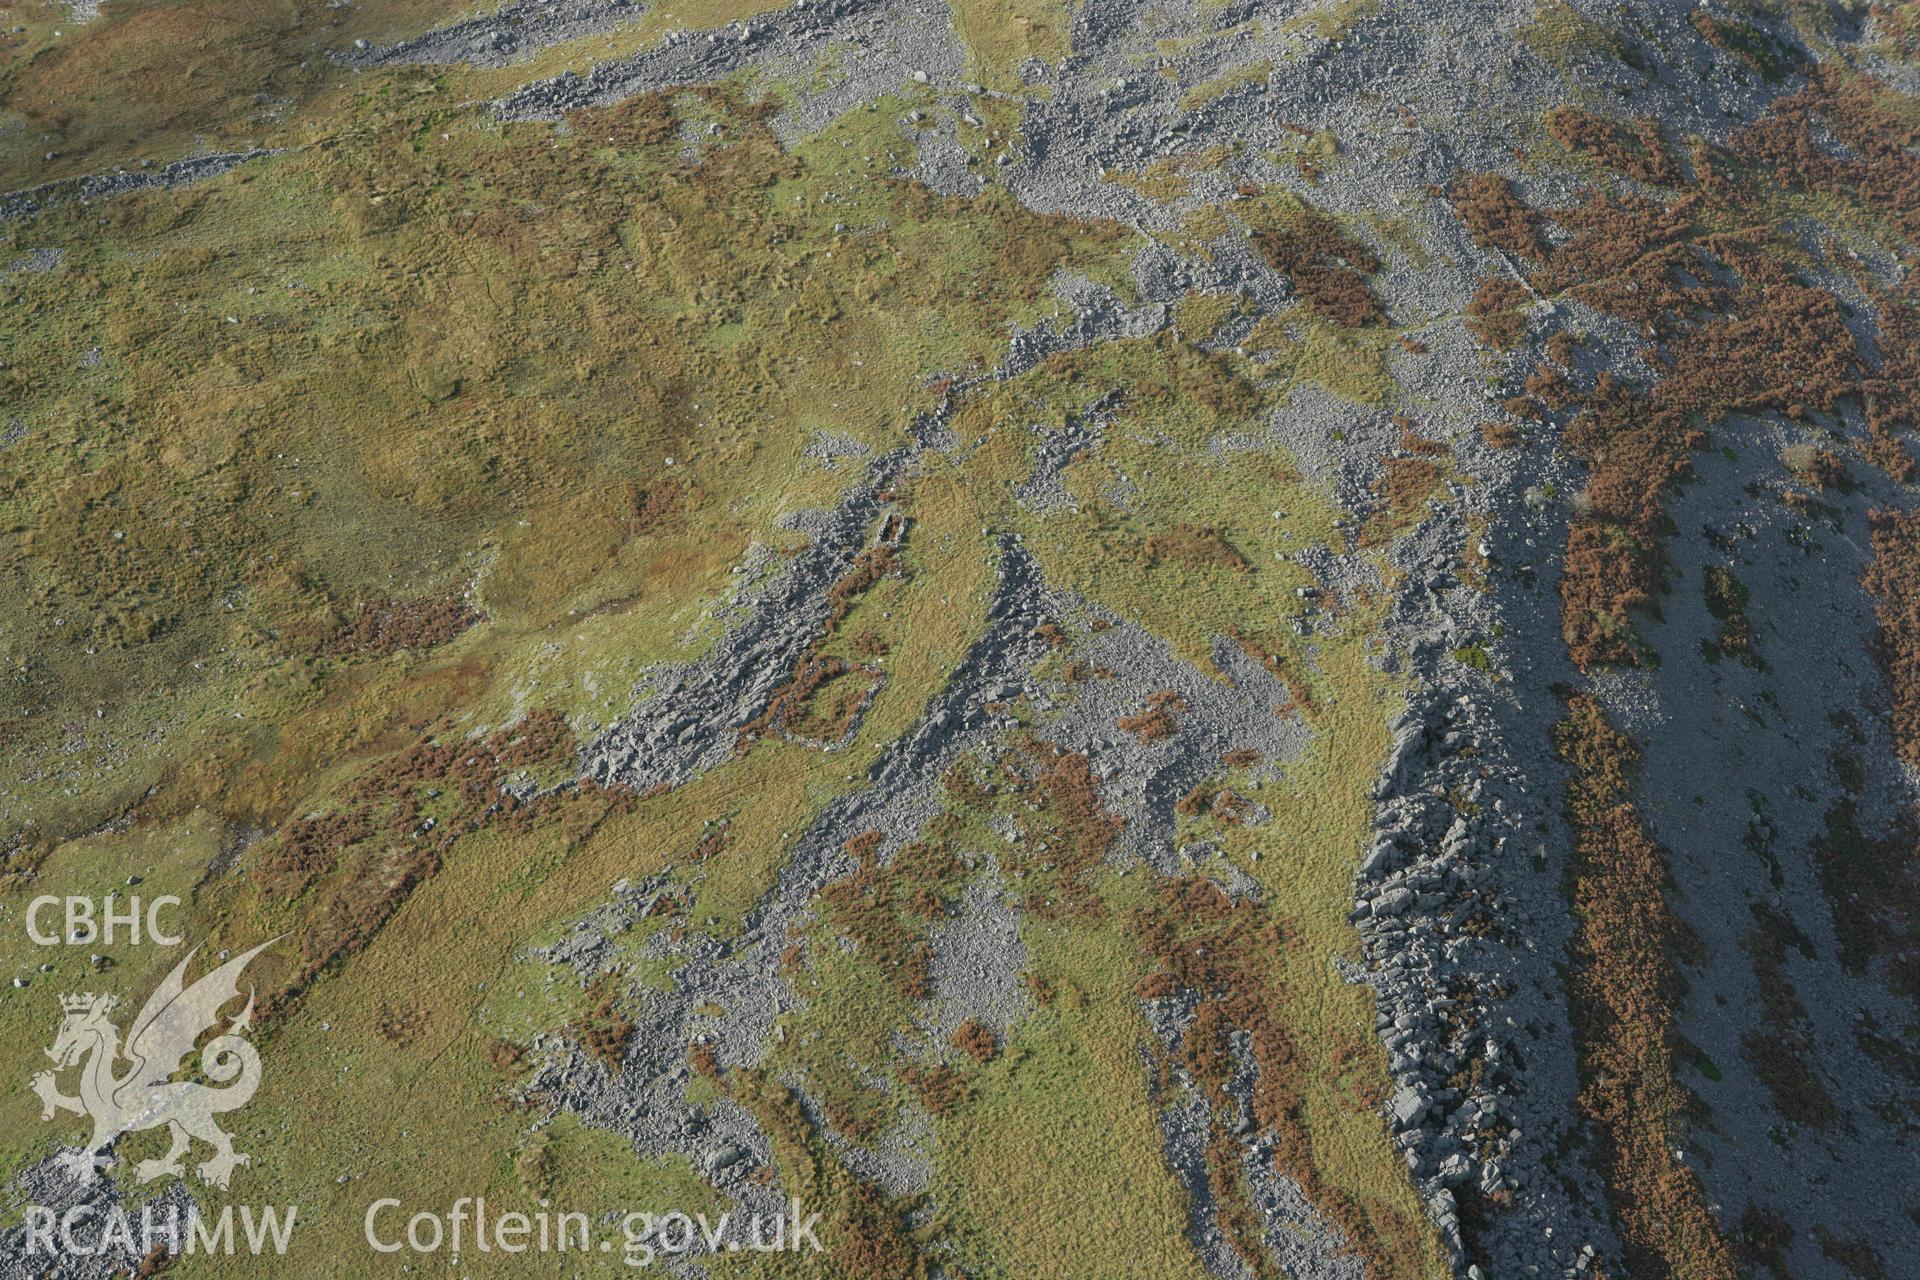 RCAHMW colour oblique aerial photograph of Upper Cwm Twrch Deserted Rural Settlement. Taken on 14 October 2009 by Toby Driver